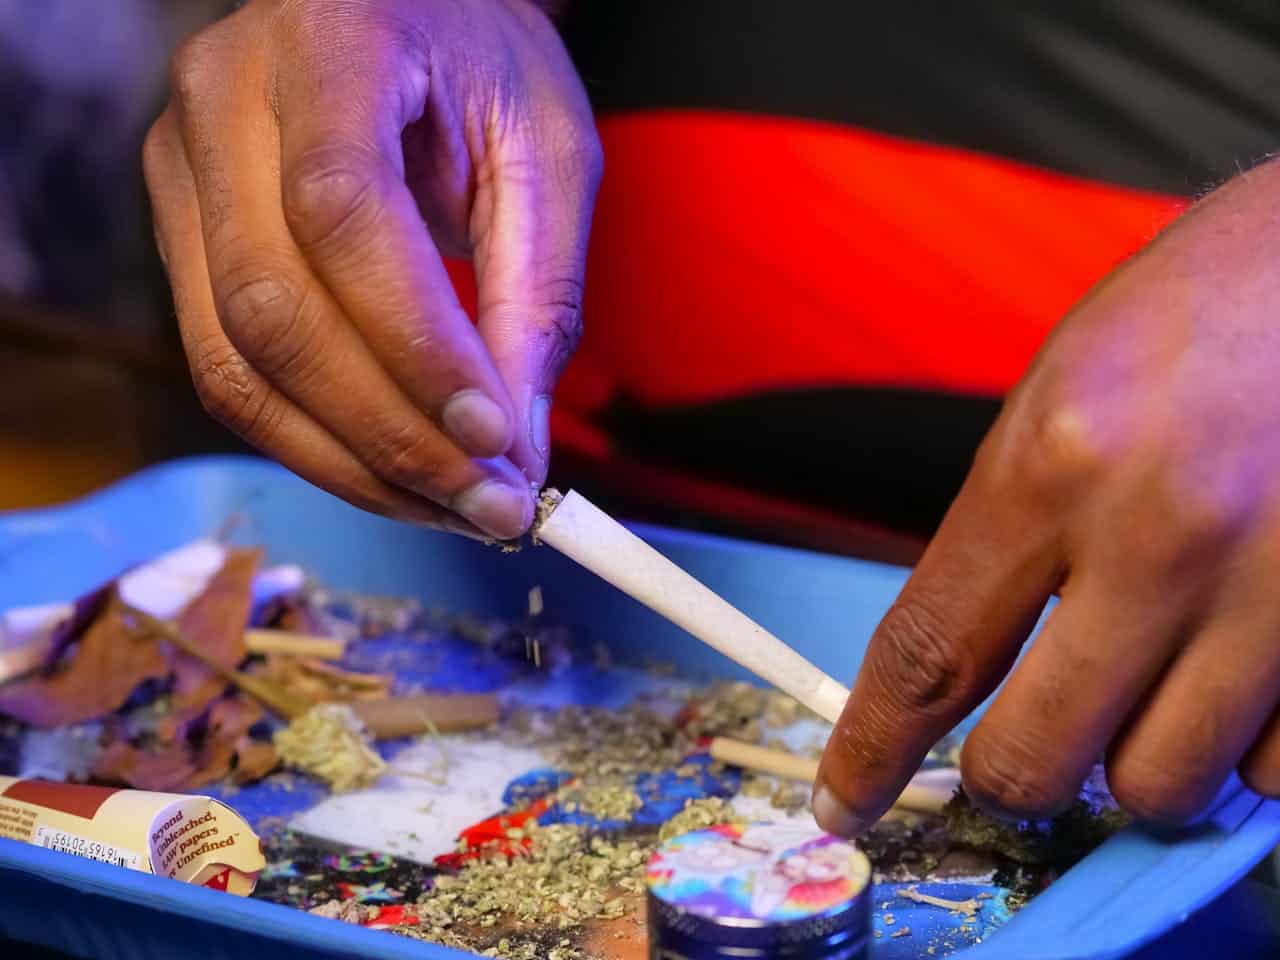 Person Filling Up Blunt Rolling Paper With Ground Cannabis Flower